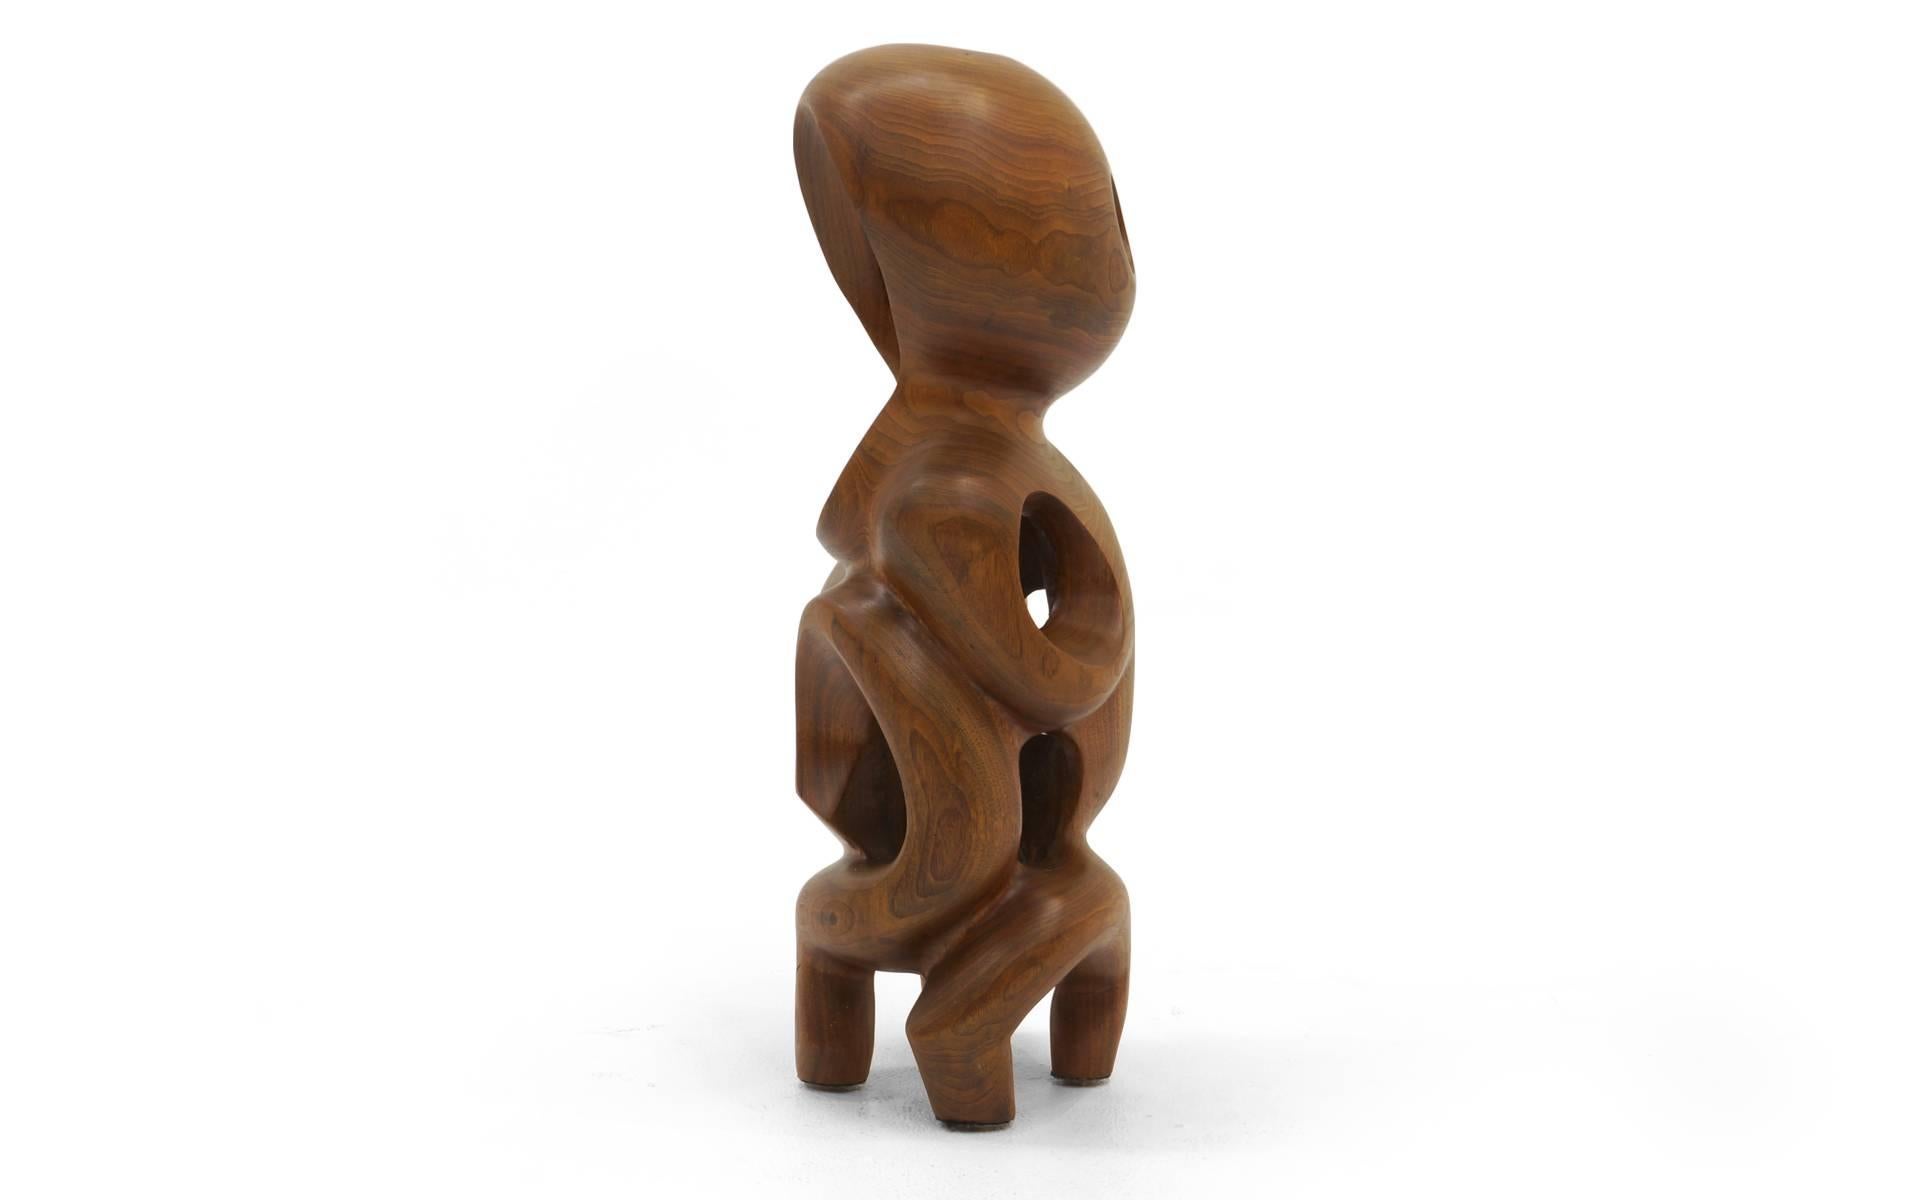 Walnut table sculpture by Cecil C. Carstenson. Organic form entirely hand made from a single piece of wood. .Beautifully carved and finished.
Cecil C. Carstenson (1906-1990) was born in Marquette, Kansas in 1906, but lived most of his life in